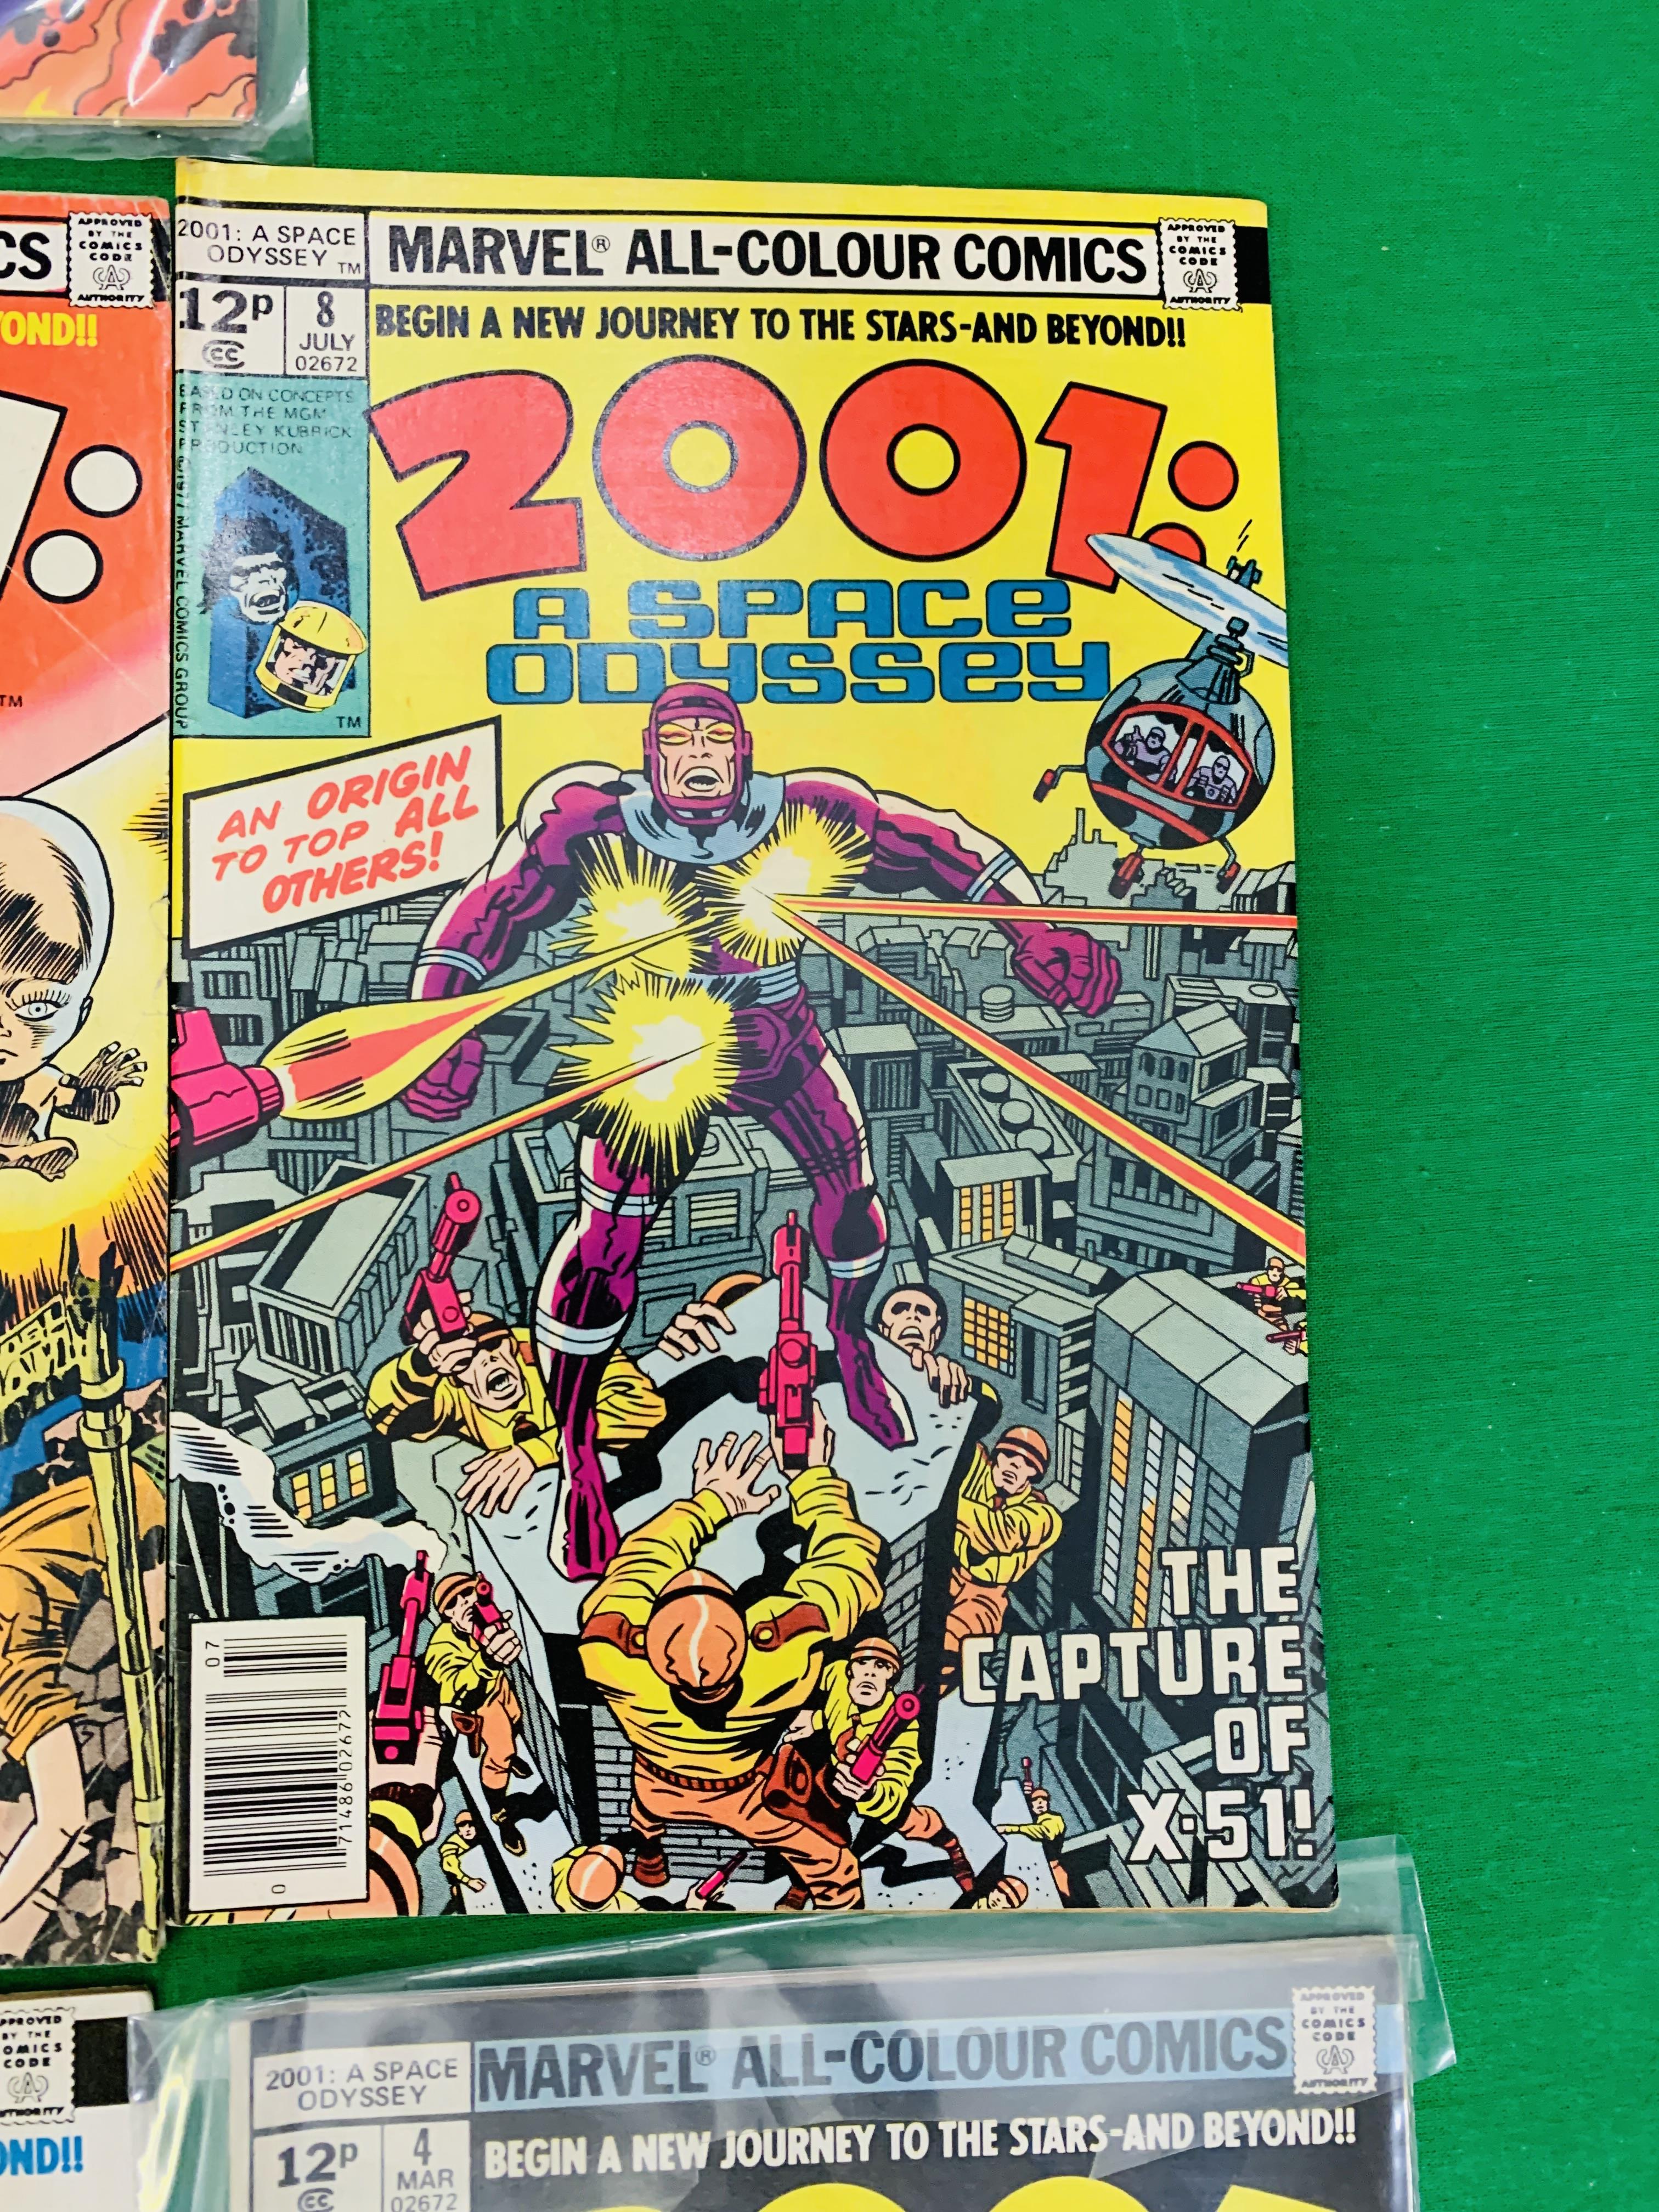 MARVEL COMICS 2001: A SPACE ODYSSEY NO. 1 - 10 FROM 1976, FIRST APPEARANCE NO. 8. MACHINE MAN X-51. - Image 9 of 11